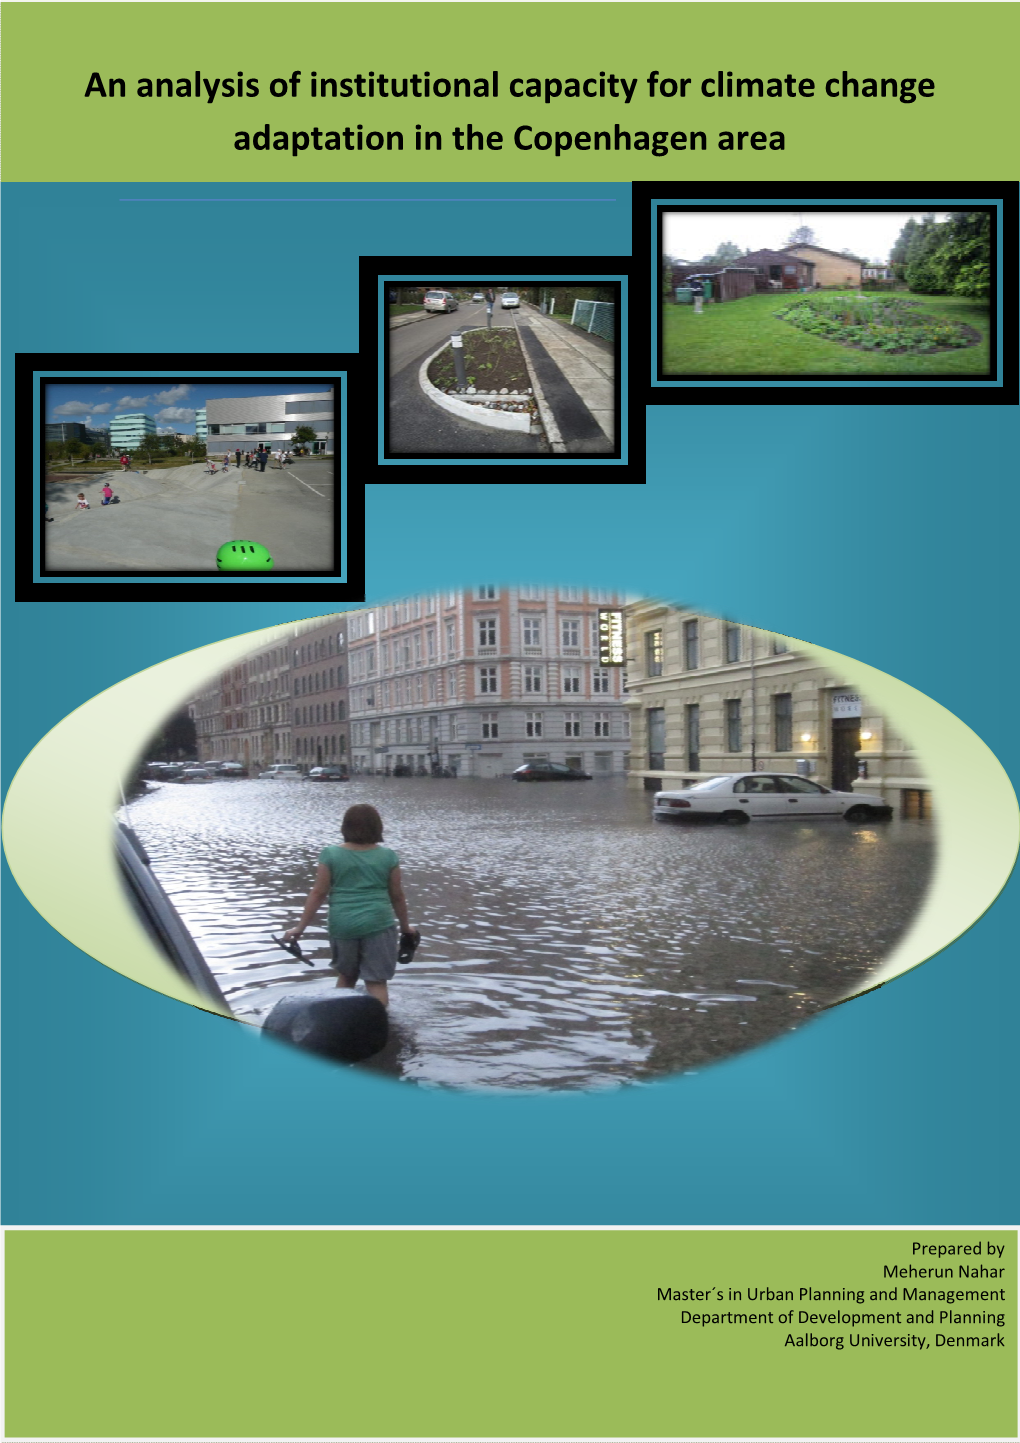 An Analysis of Institutional Capacity for Climate Change Adaptation in the Copenhagen Area